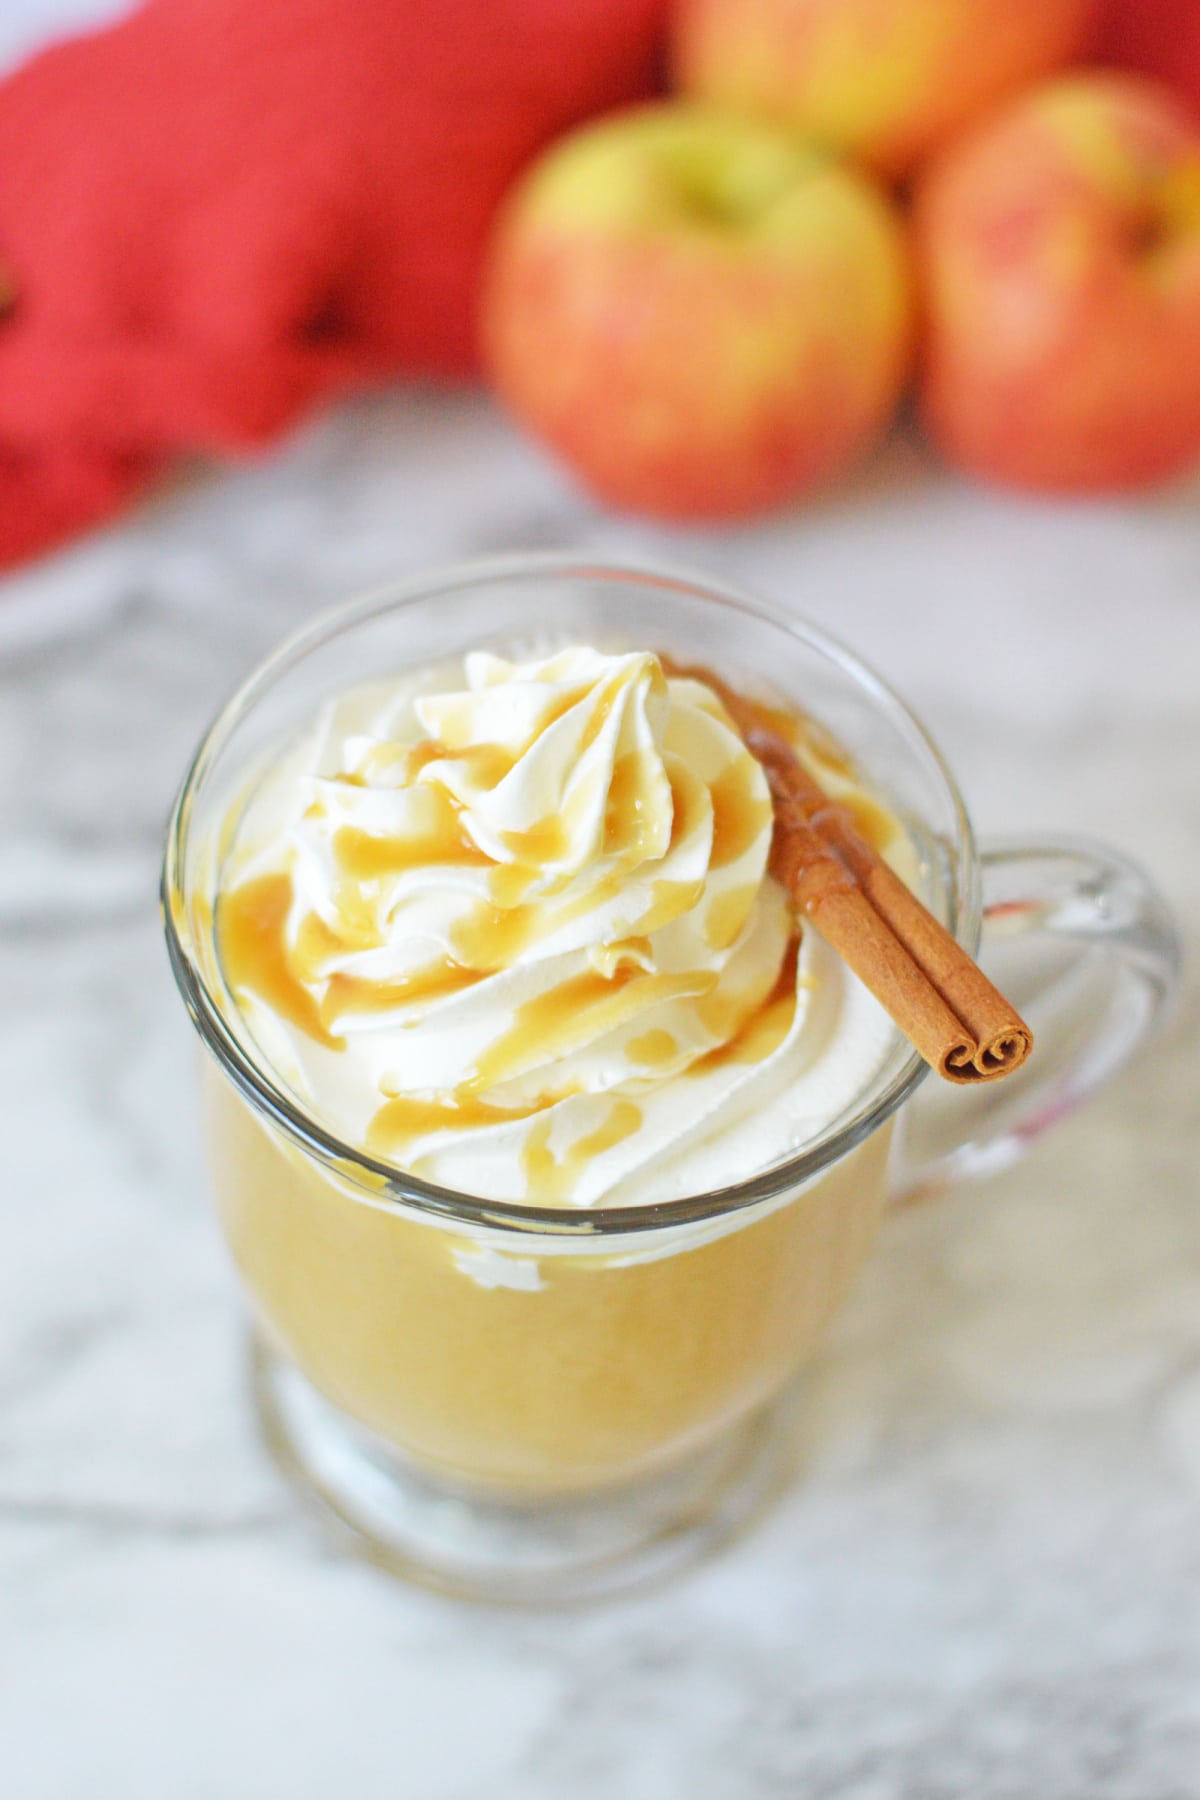 Hot Caramel Apple Cider with whipped cream and cinnamon stick